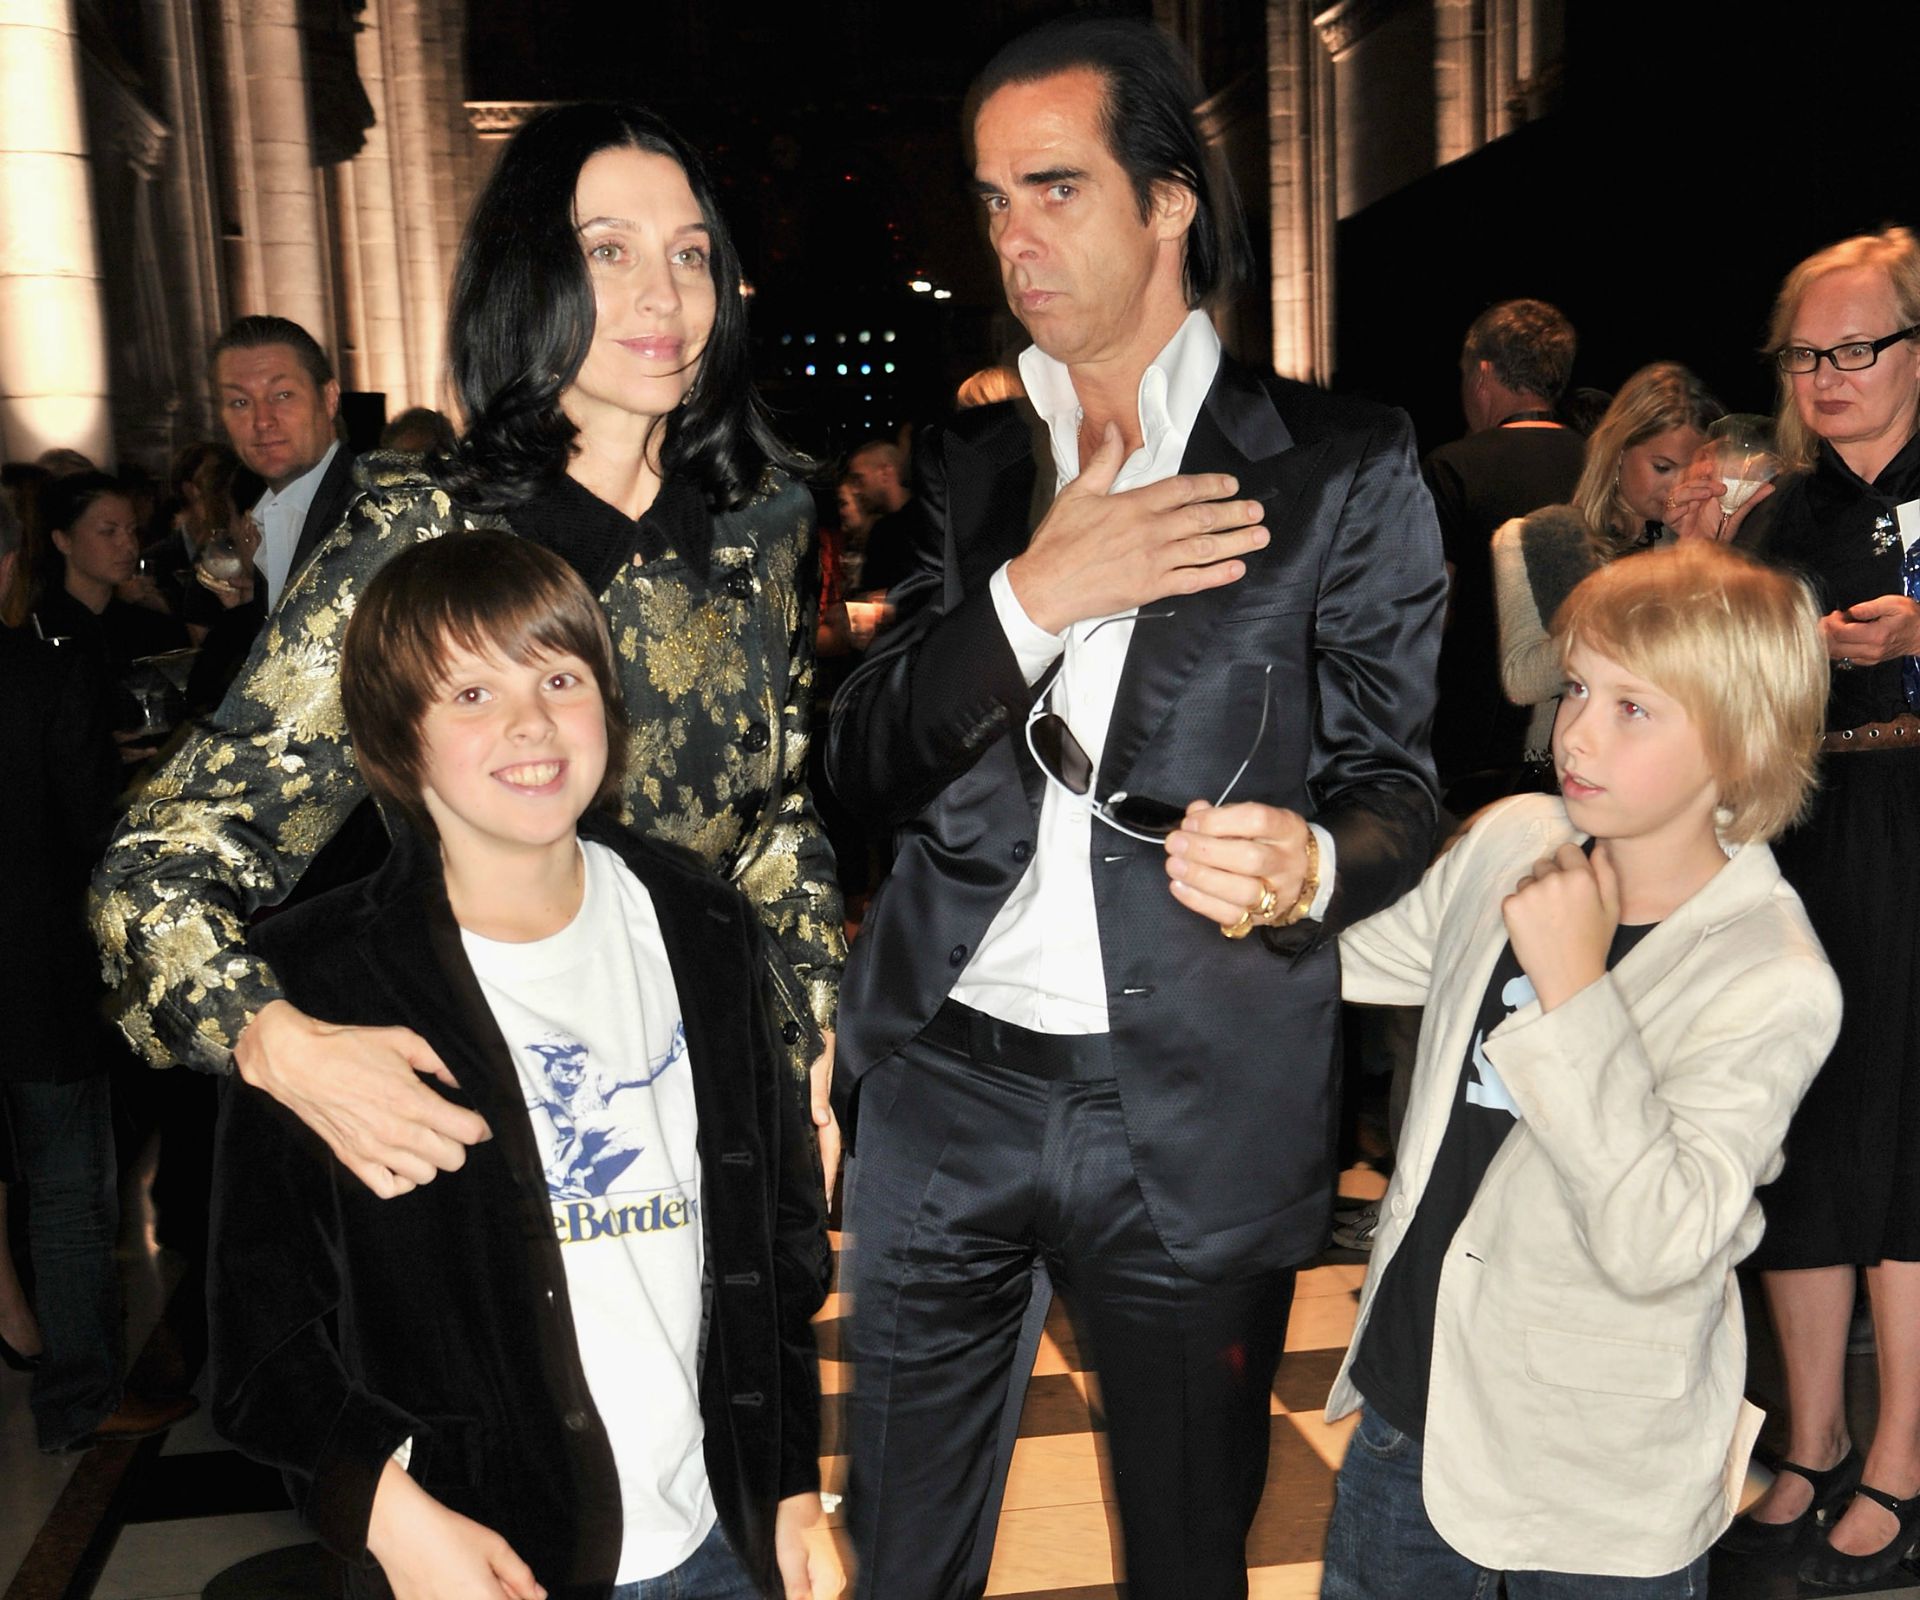 Locked gate delayed rescue of Nick Cave’s son